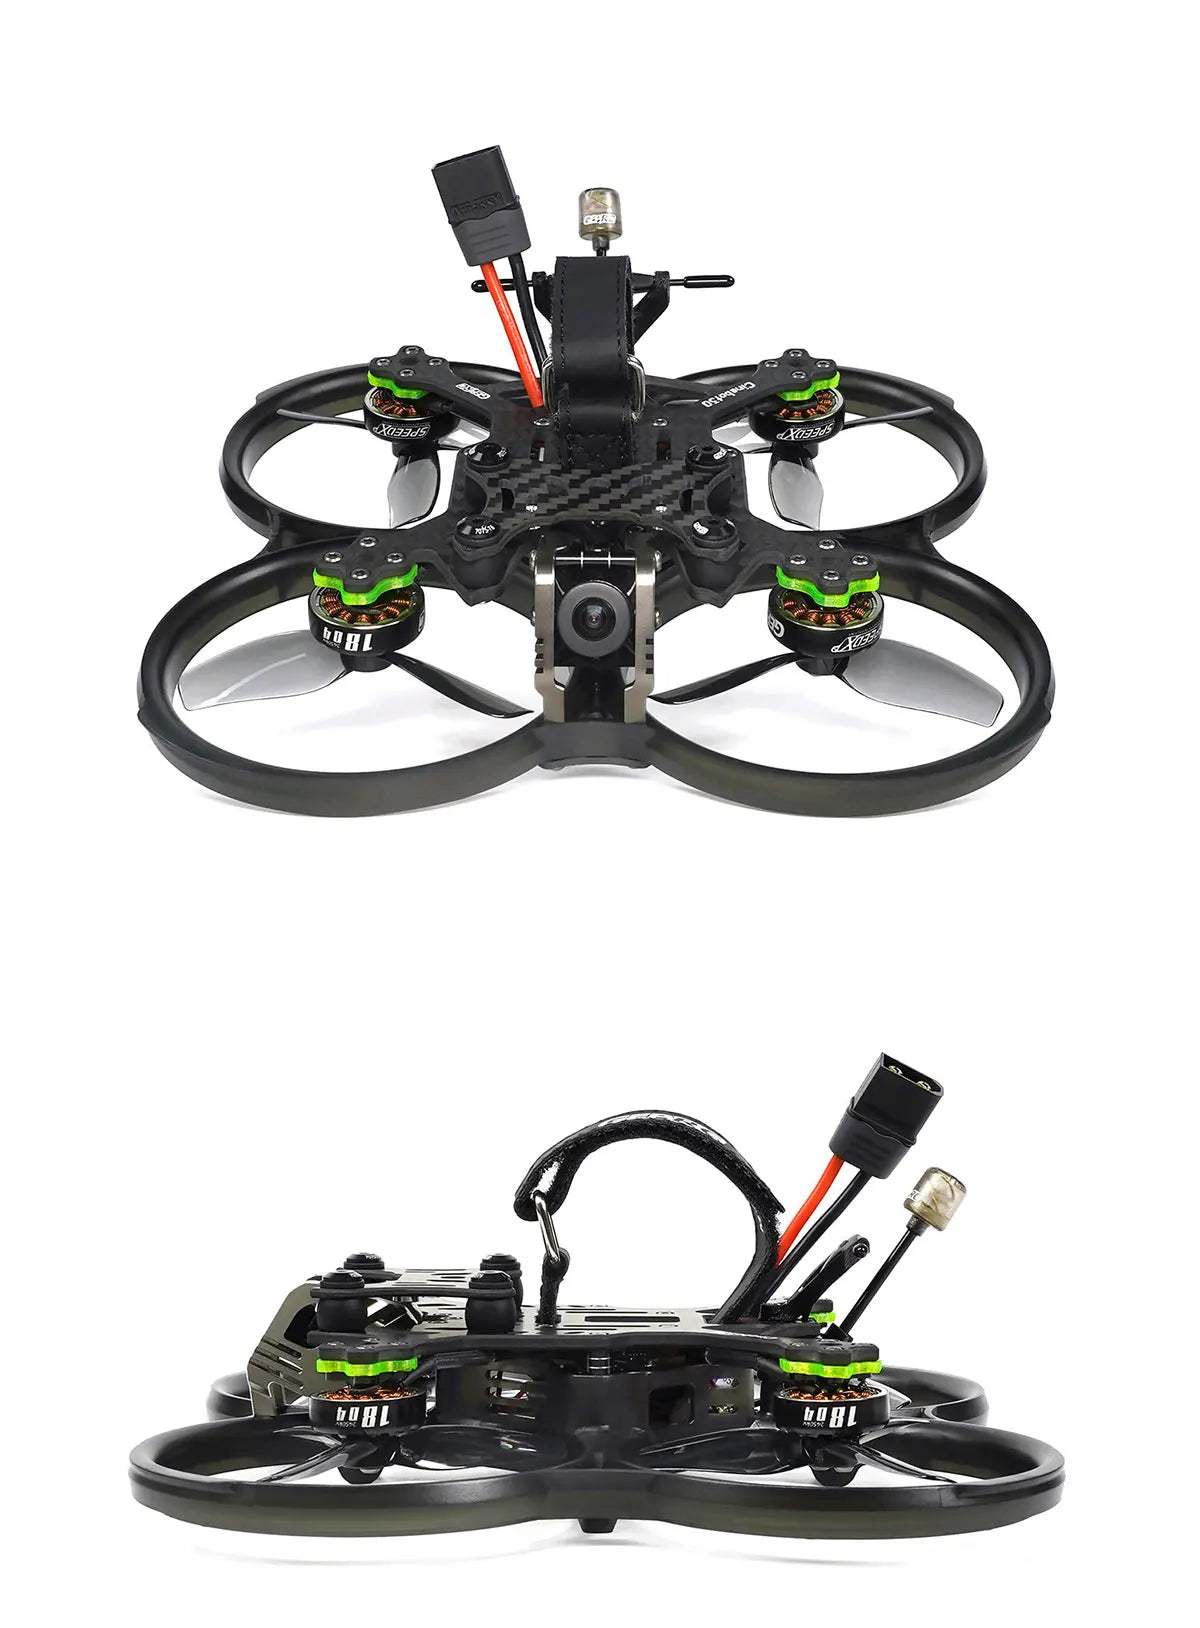 GEPRC Cinebot 30 FPV Drone, gimbal shock absorption structure can disintegrate high frequency jitter and jelly